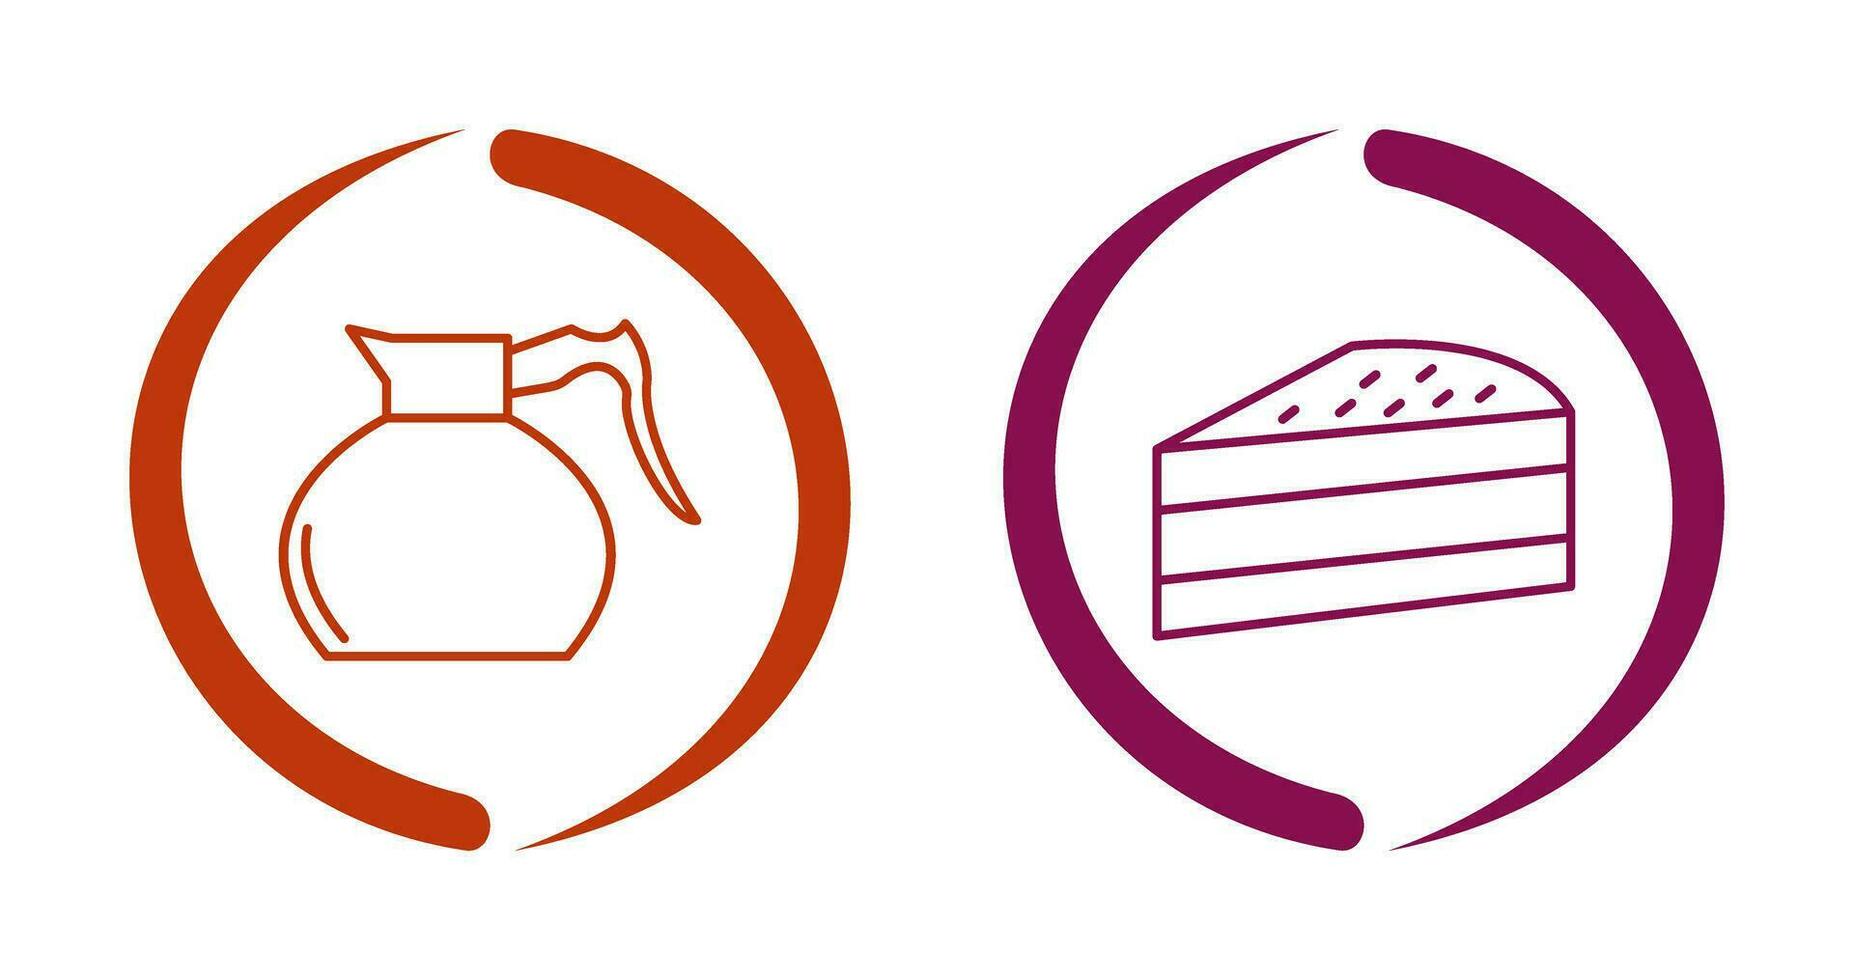 cake slice and coffee pot  Icon vector